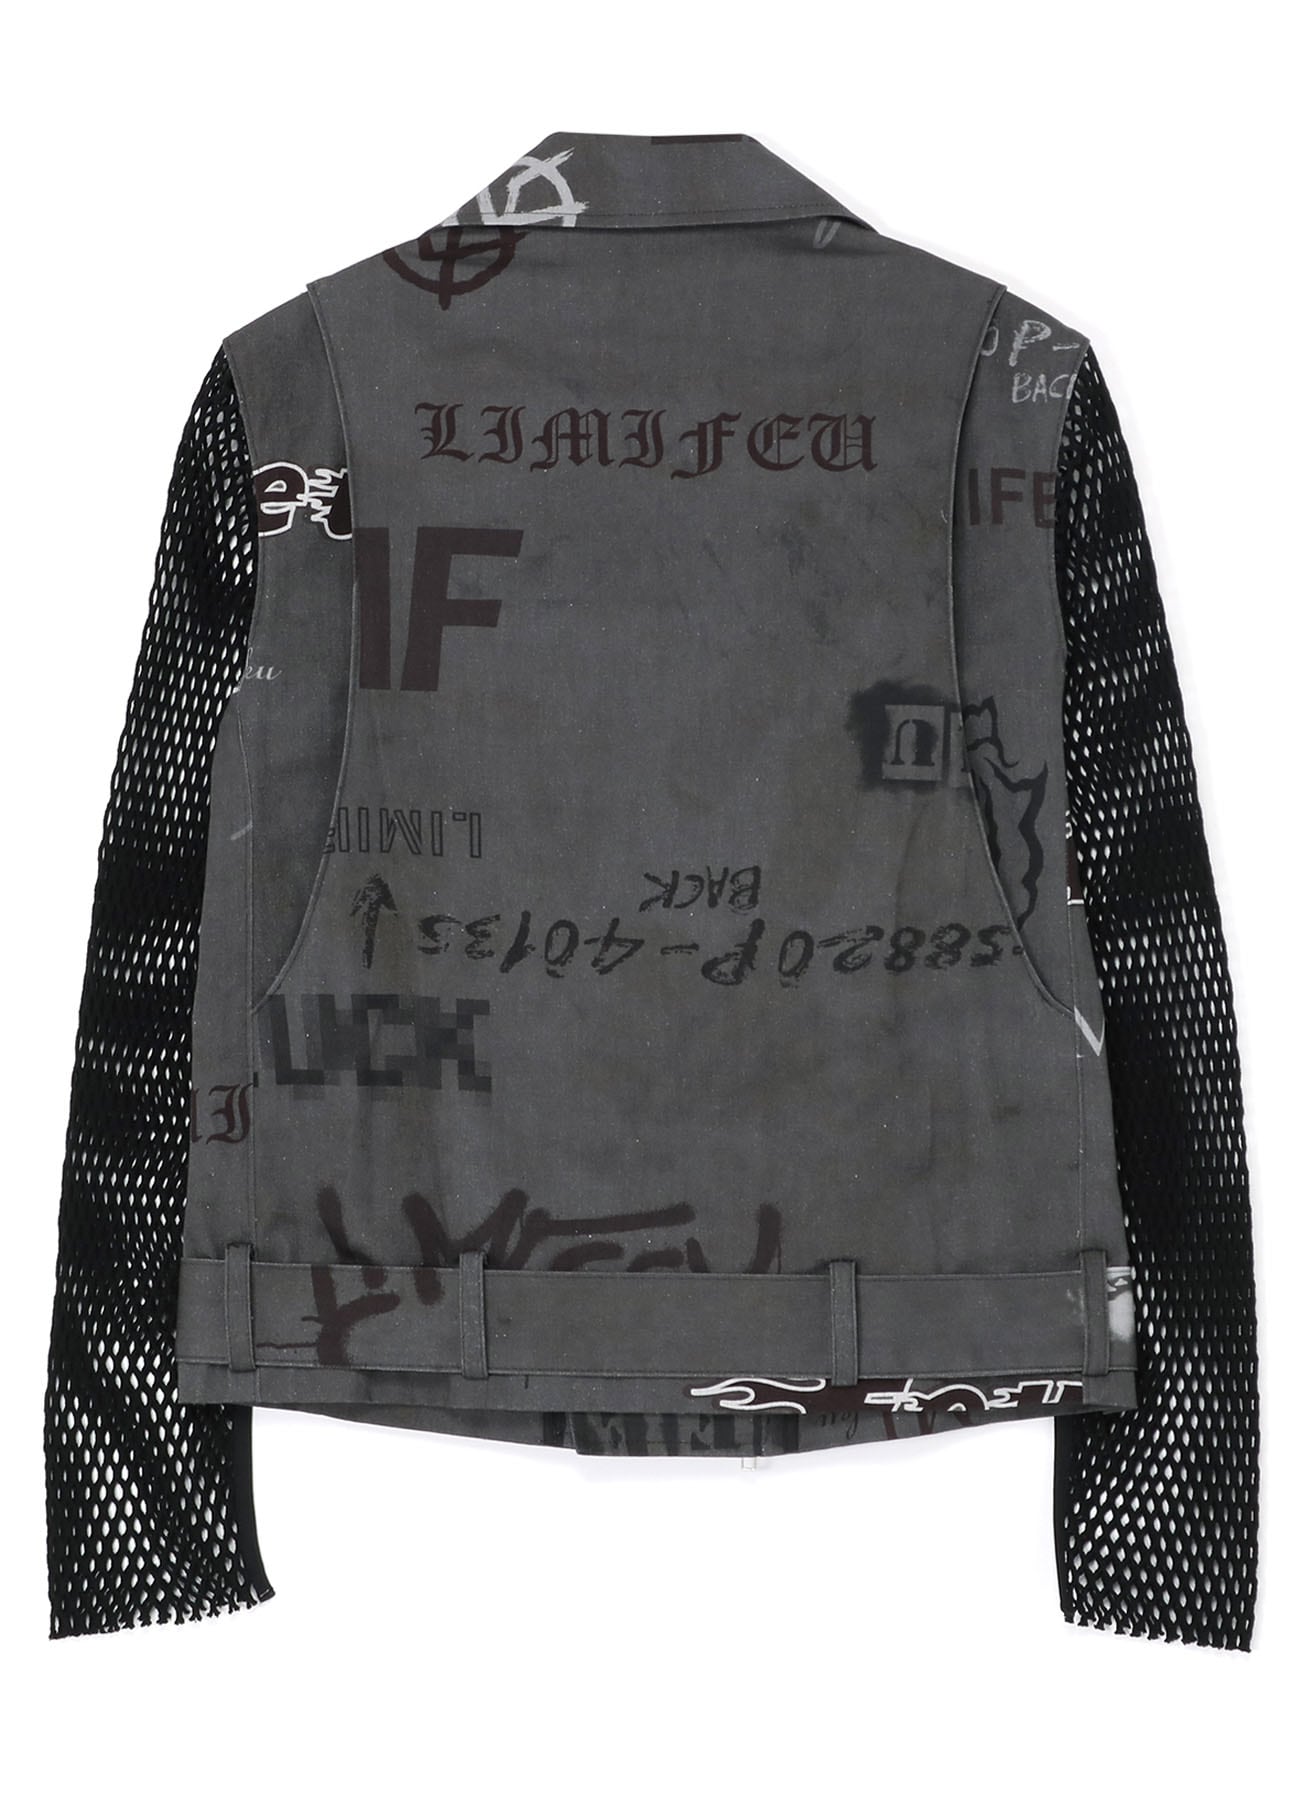 LIMI LOGO COLLAGE PT NET SLEEVES RIDERS JKT(S gray): Vintage 1.1 